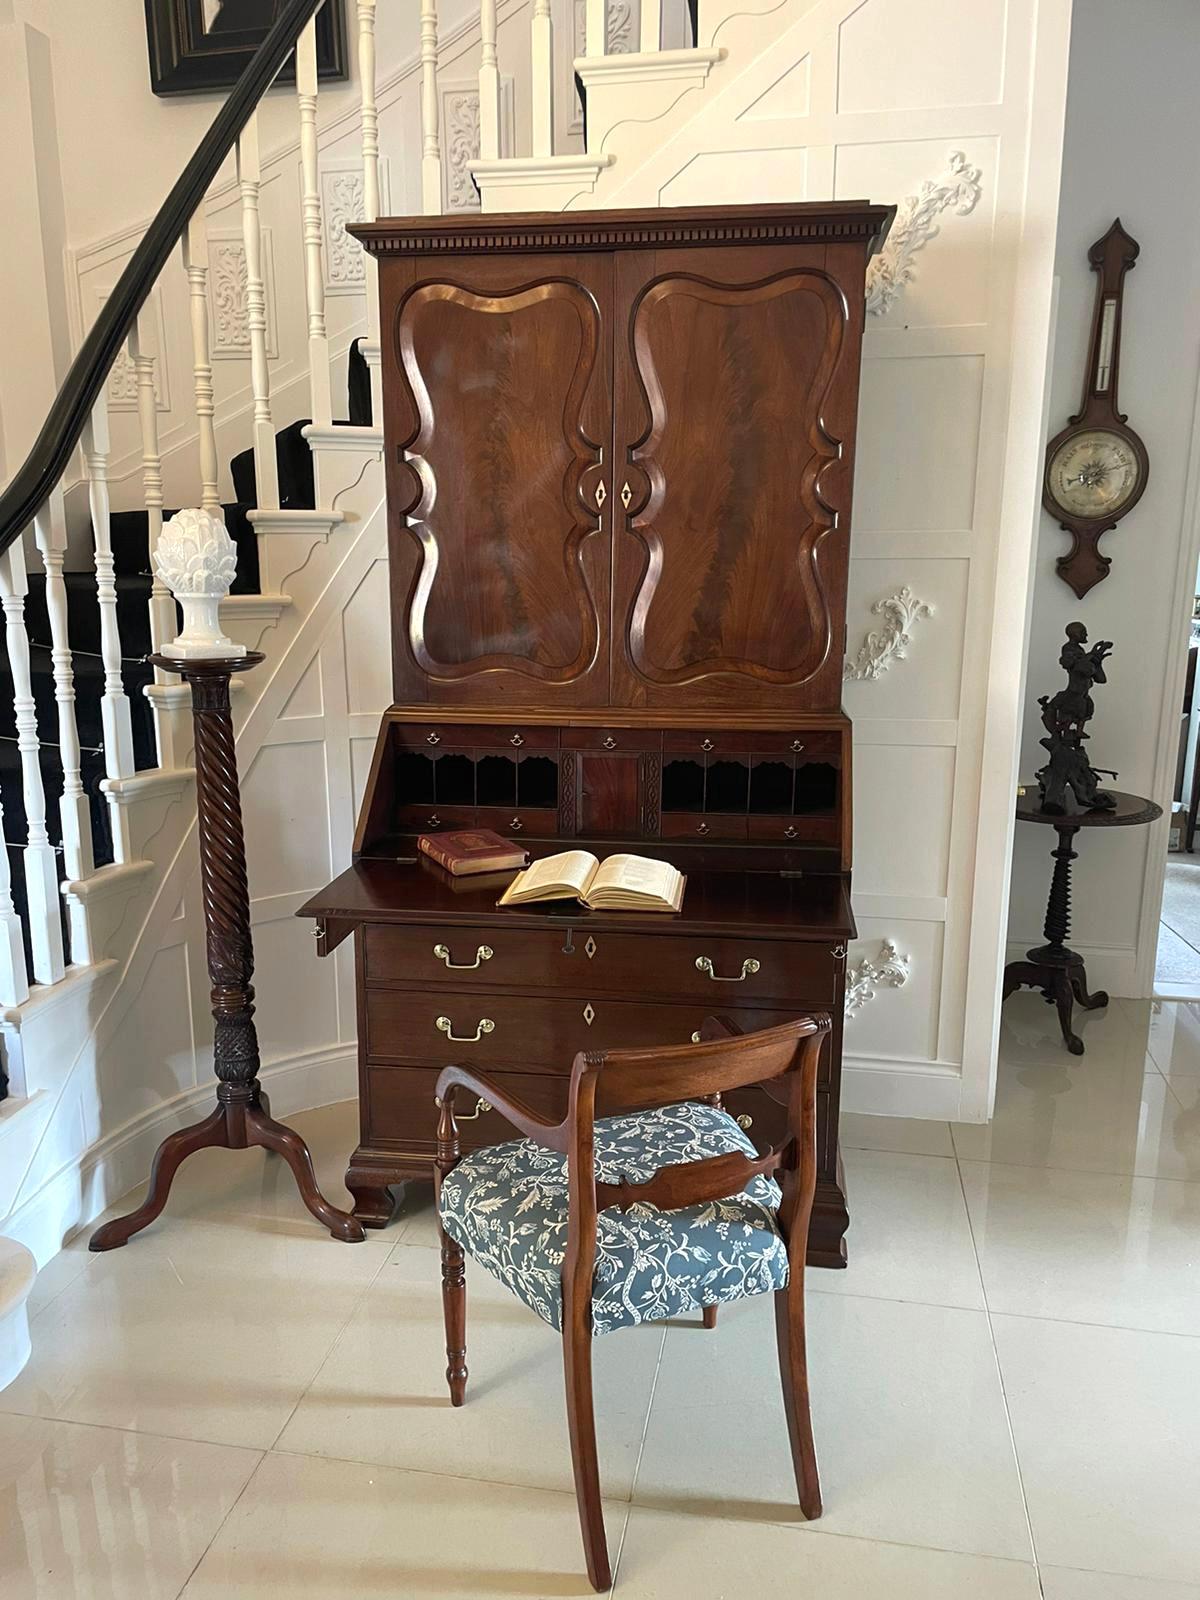 Outstanding quality antique George II figured mahogany bureau bookcase having an outstanding quality figured mahogany top with unusual shaped panelled doors opening to reveal a fitted interior consisting of four drawers, four pigeon holes and two